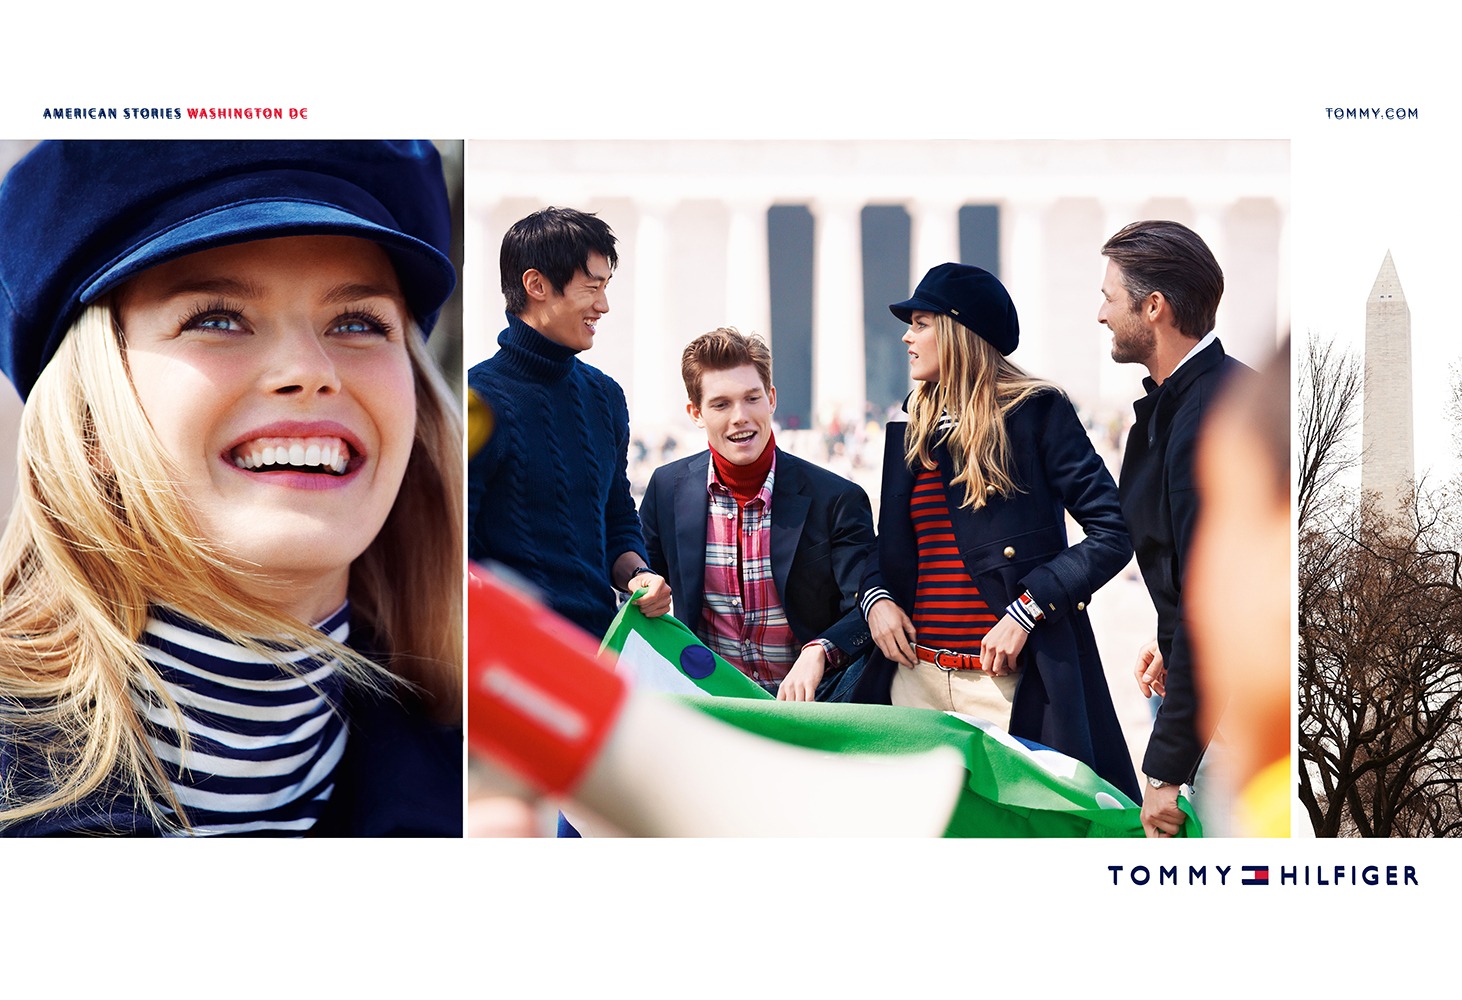 Tommy Hilfiger 1 by Phil POYNTER